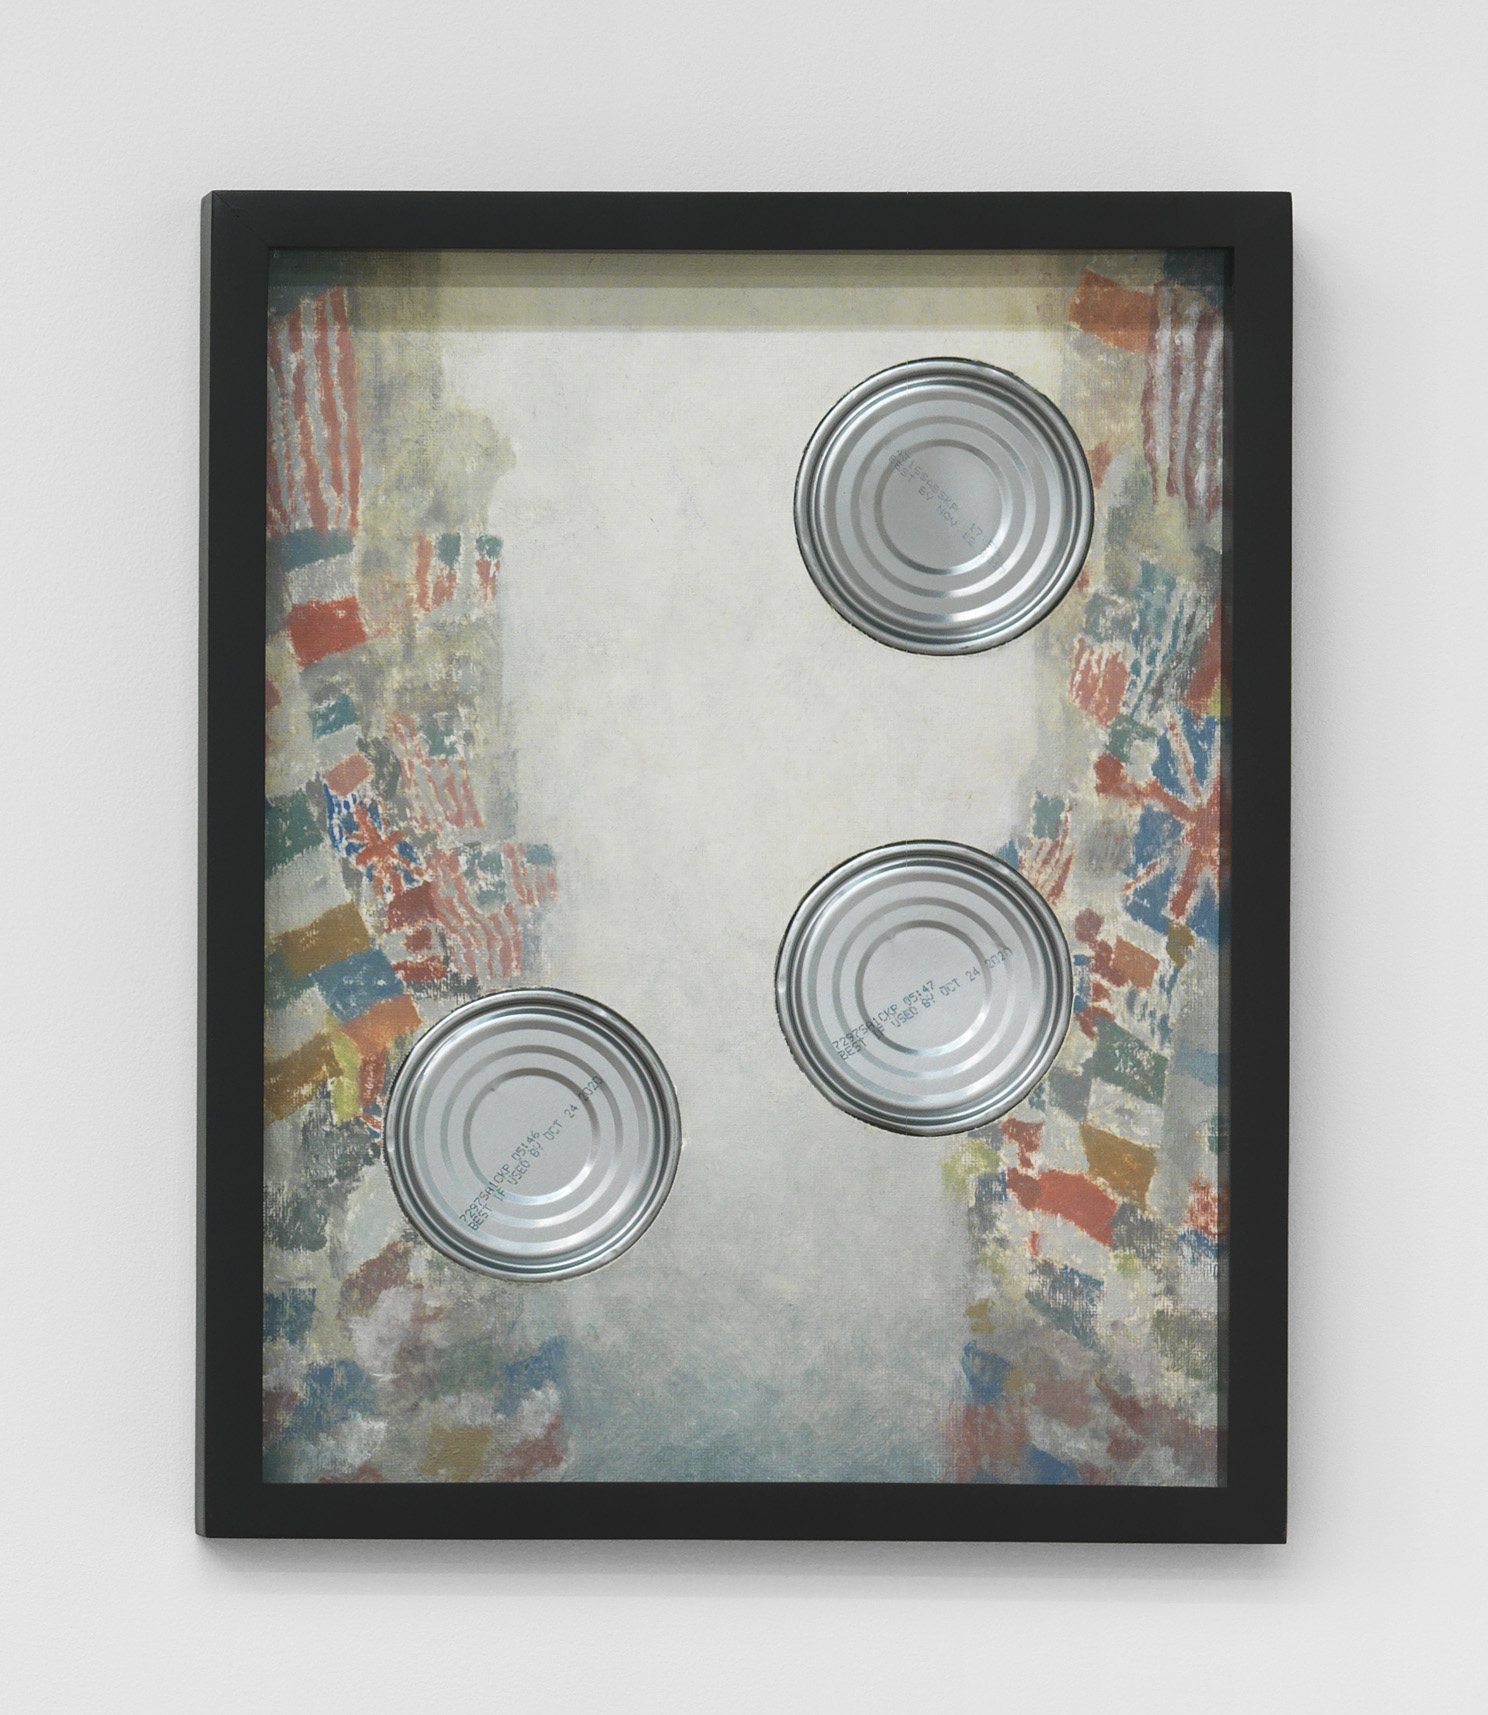 Alex Kwartler, Celebration! (After Childe Hassam), 2018, oil on canvas board, aluminum can, 14h x 11w in.